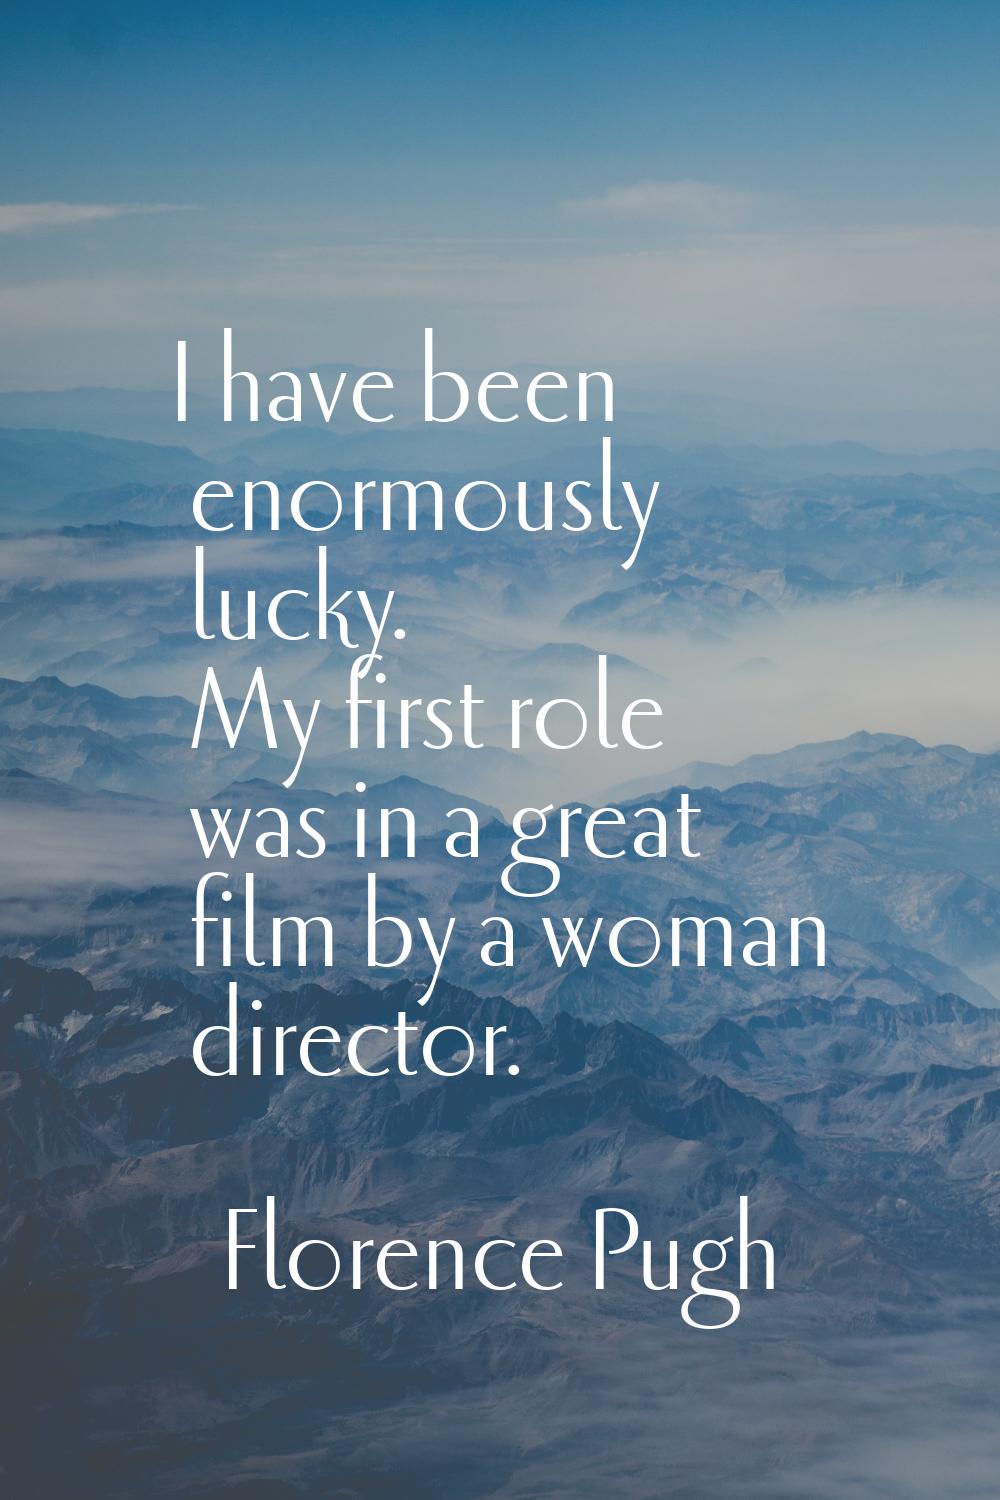 I have been enormously lucky. My first role was in a great film by a woman director.